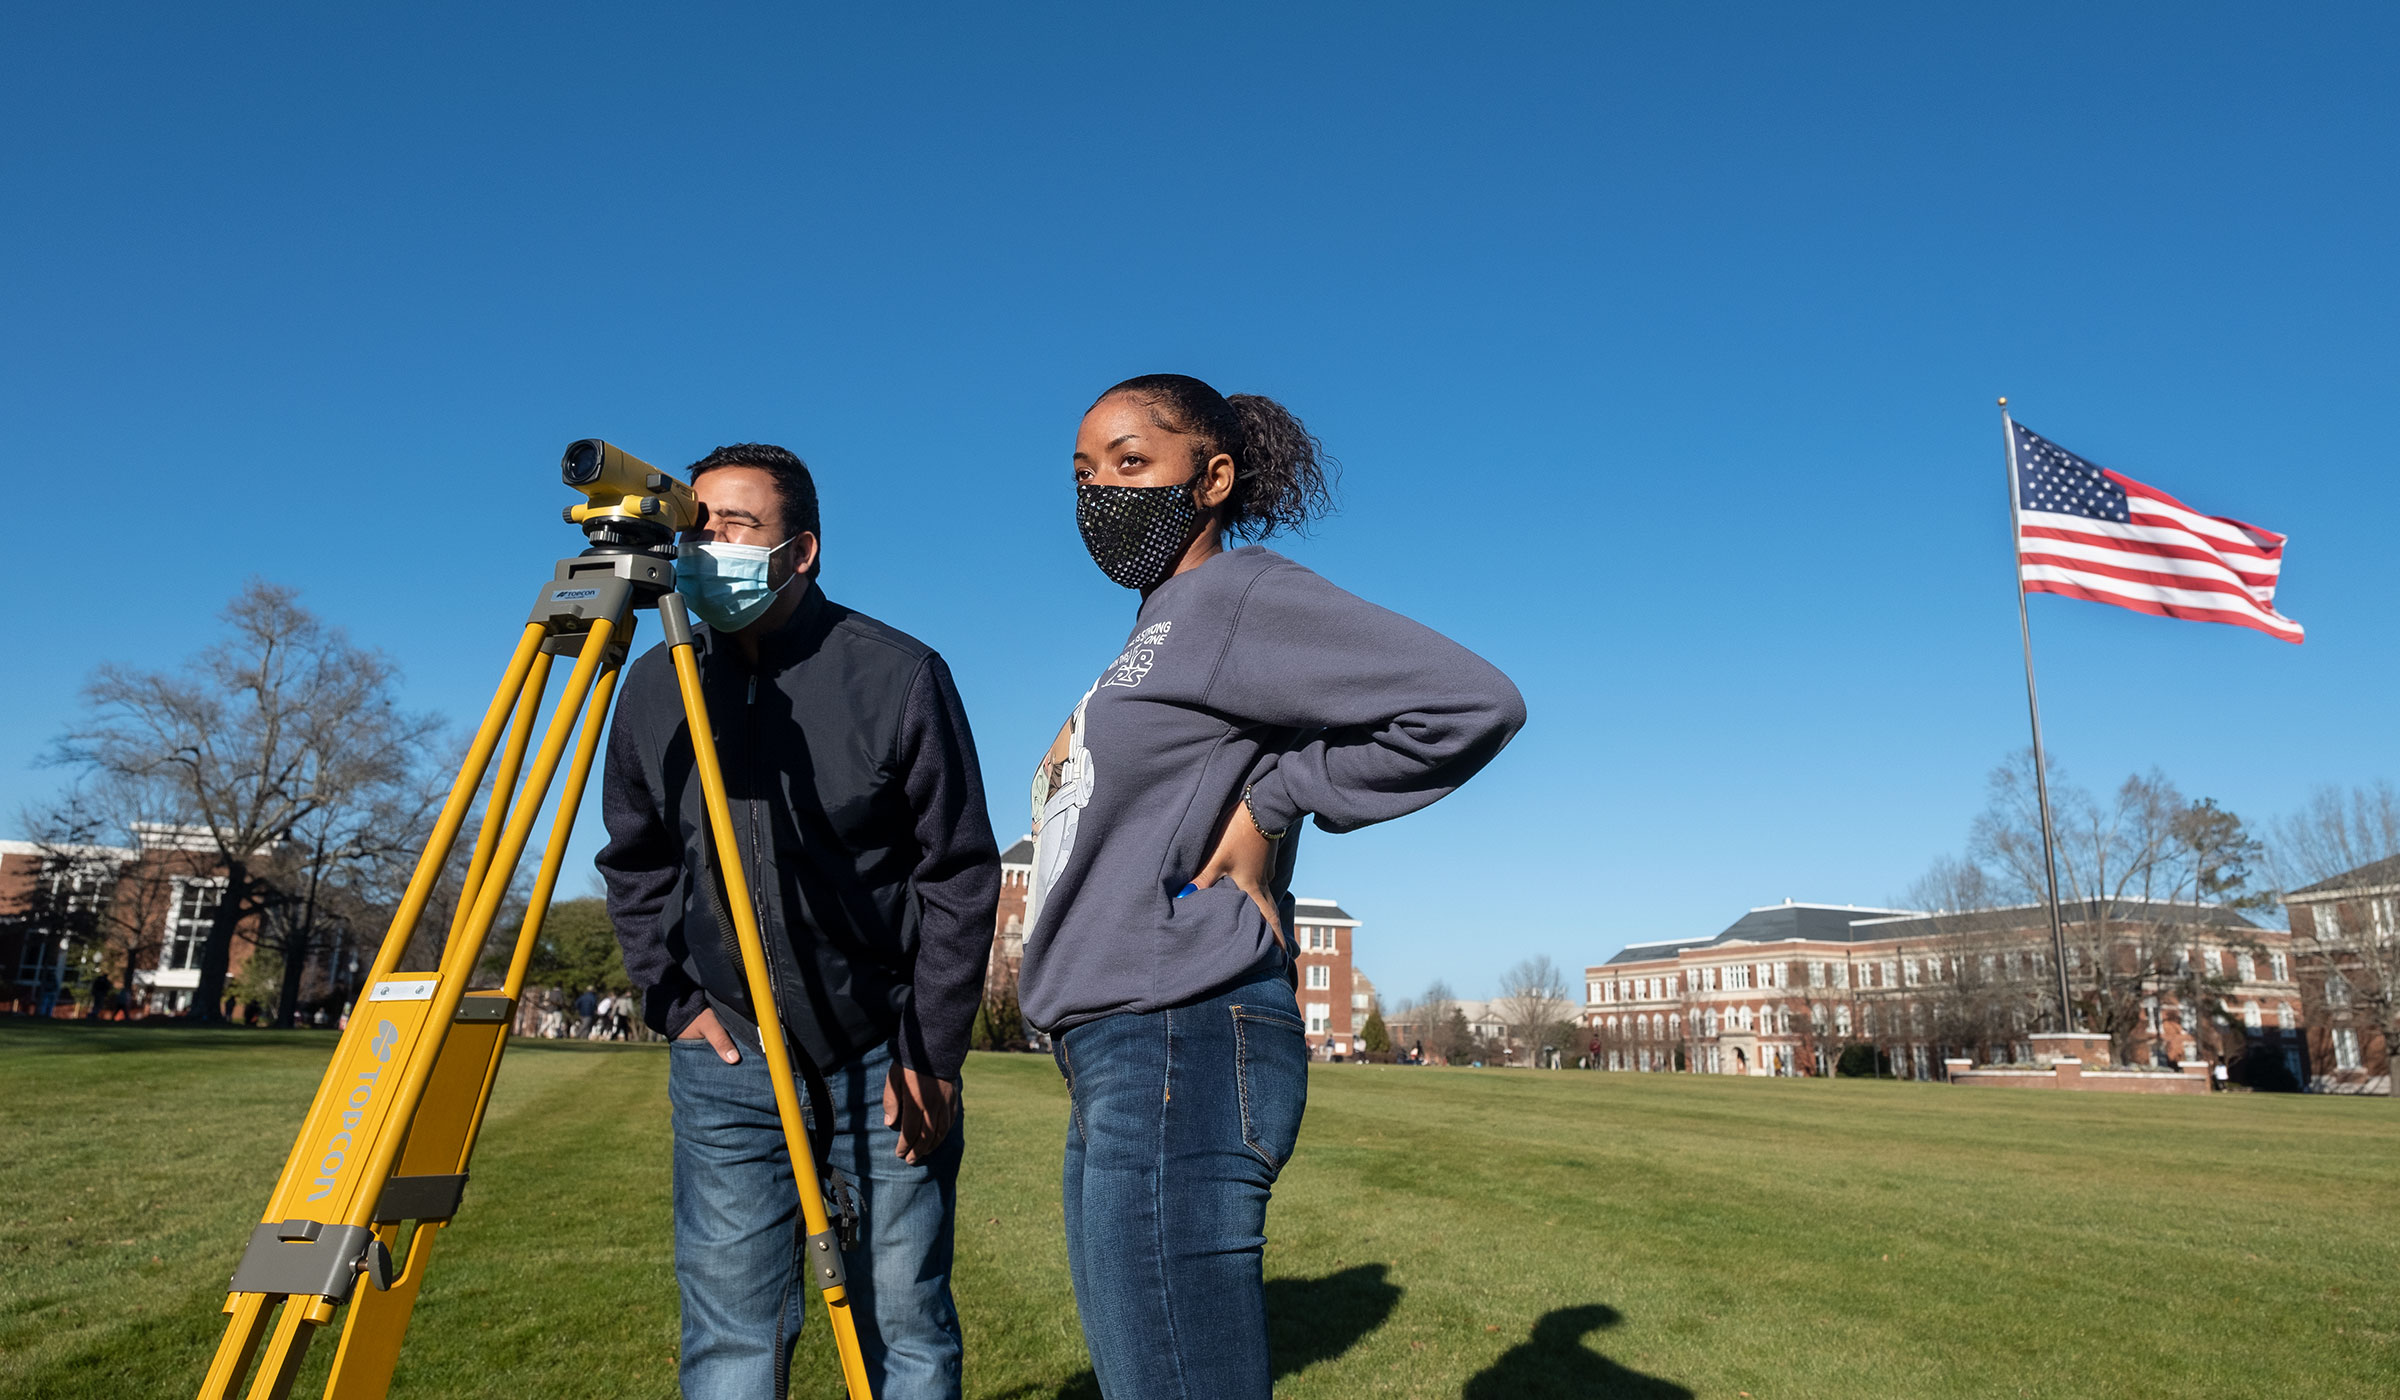 With a sunlit Drill Field in the background, Engineering student Nim Kc leans in to look through the survey viewfinder while Courtlyn Carson looks on.  Both wear masks for safety against Covid-19.